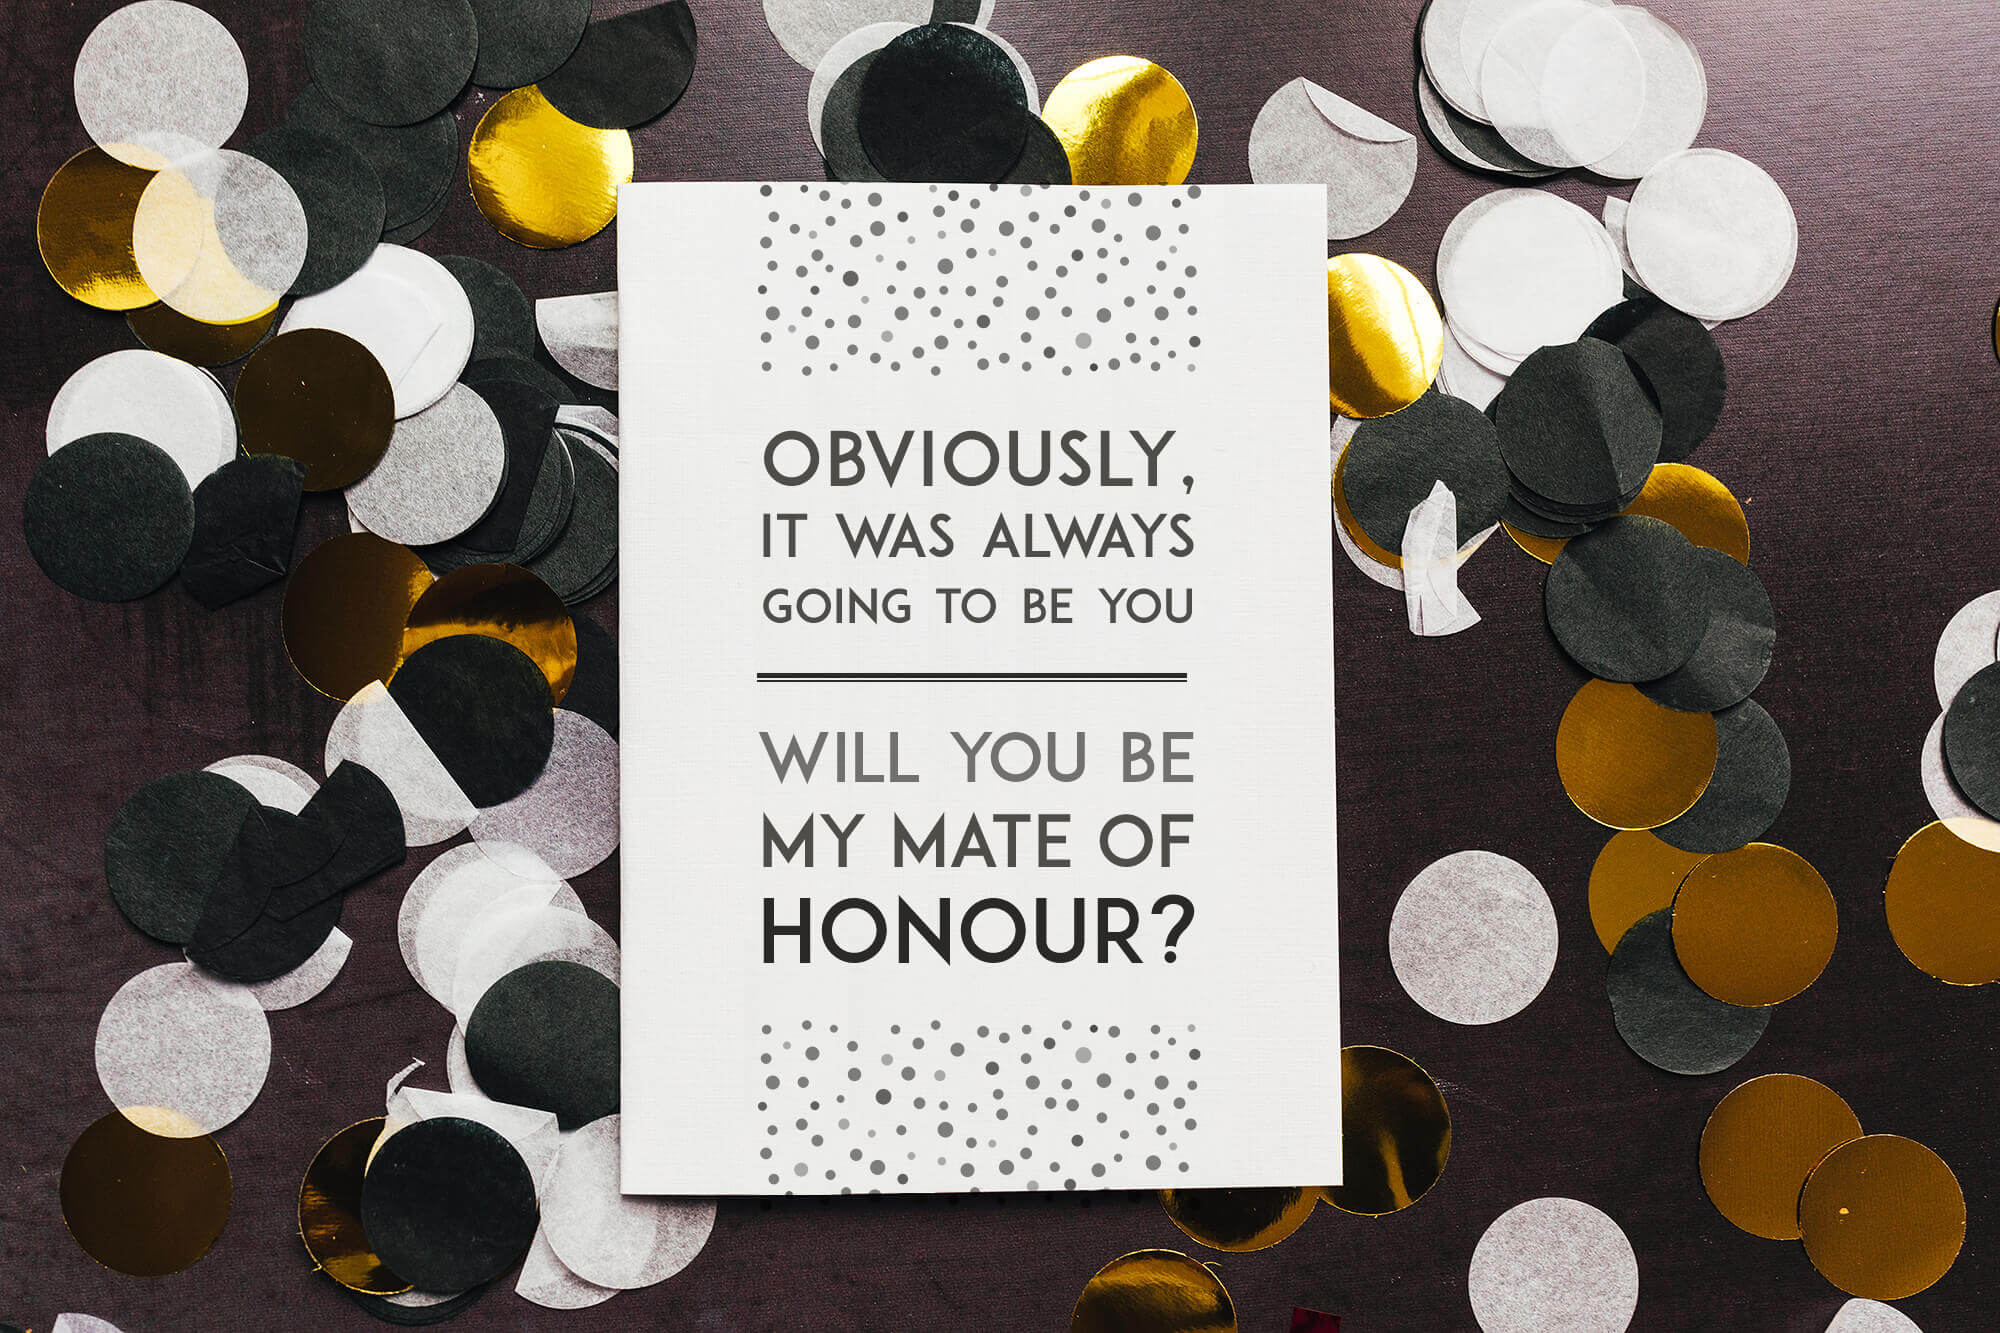 Vintage-inspired will you be my mate of honour proposal card